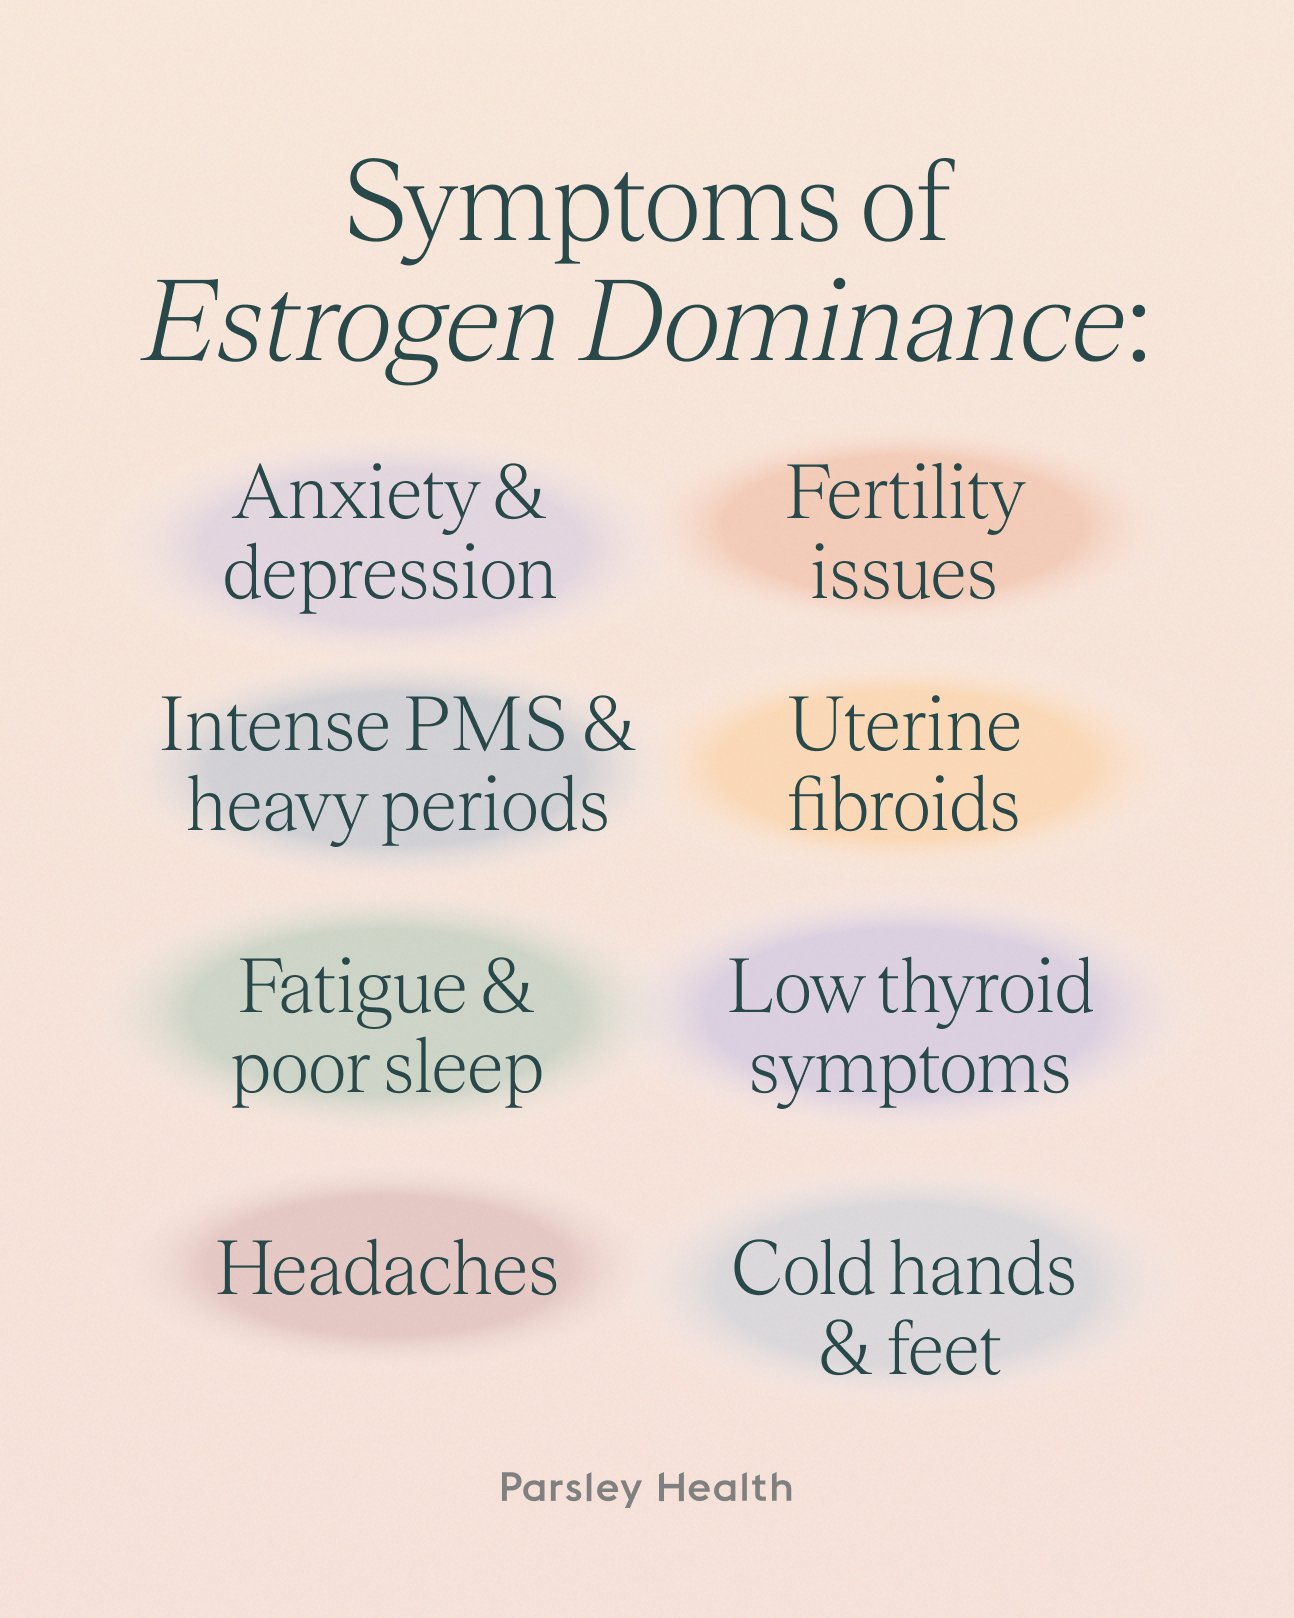 Parsley Health on X: Short temper? PMS symptoms? Anxiety?⁠ ⁠As a Parsley  member, your doctor works closely with you to determine whether you have  estrogen dominance. From there they will create a